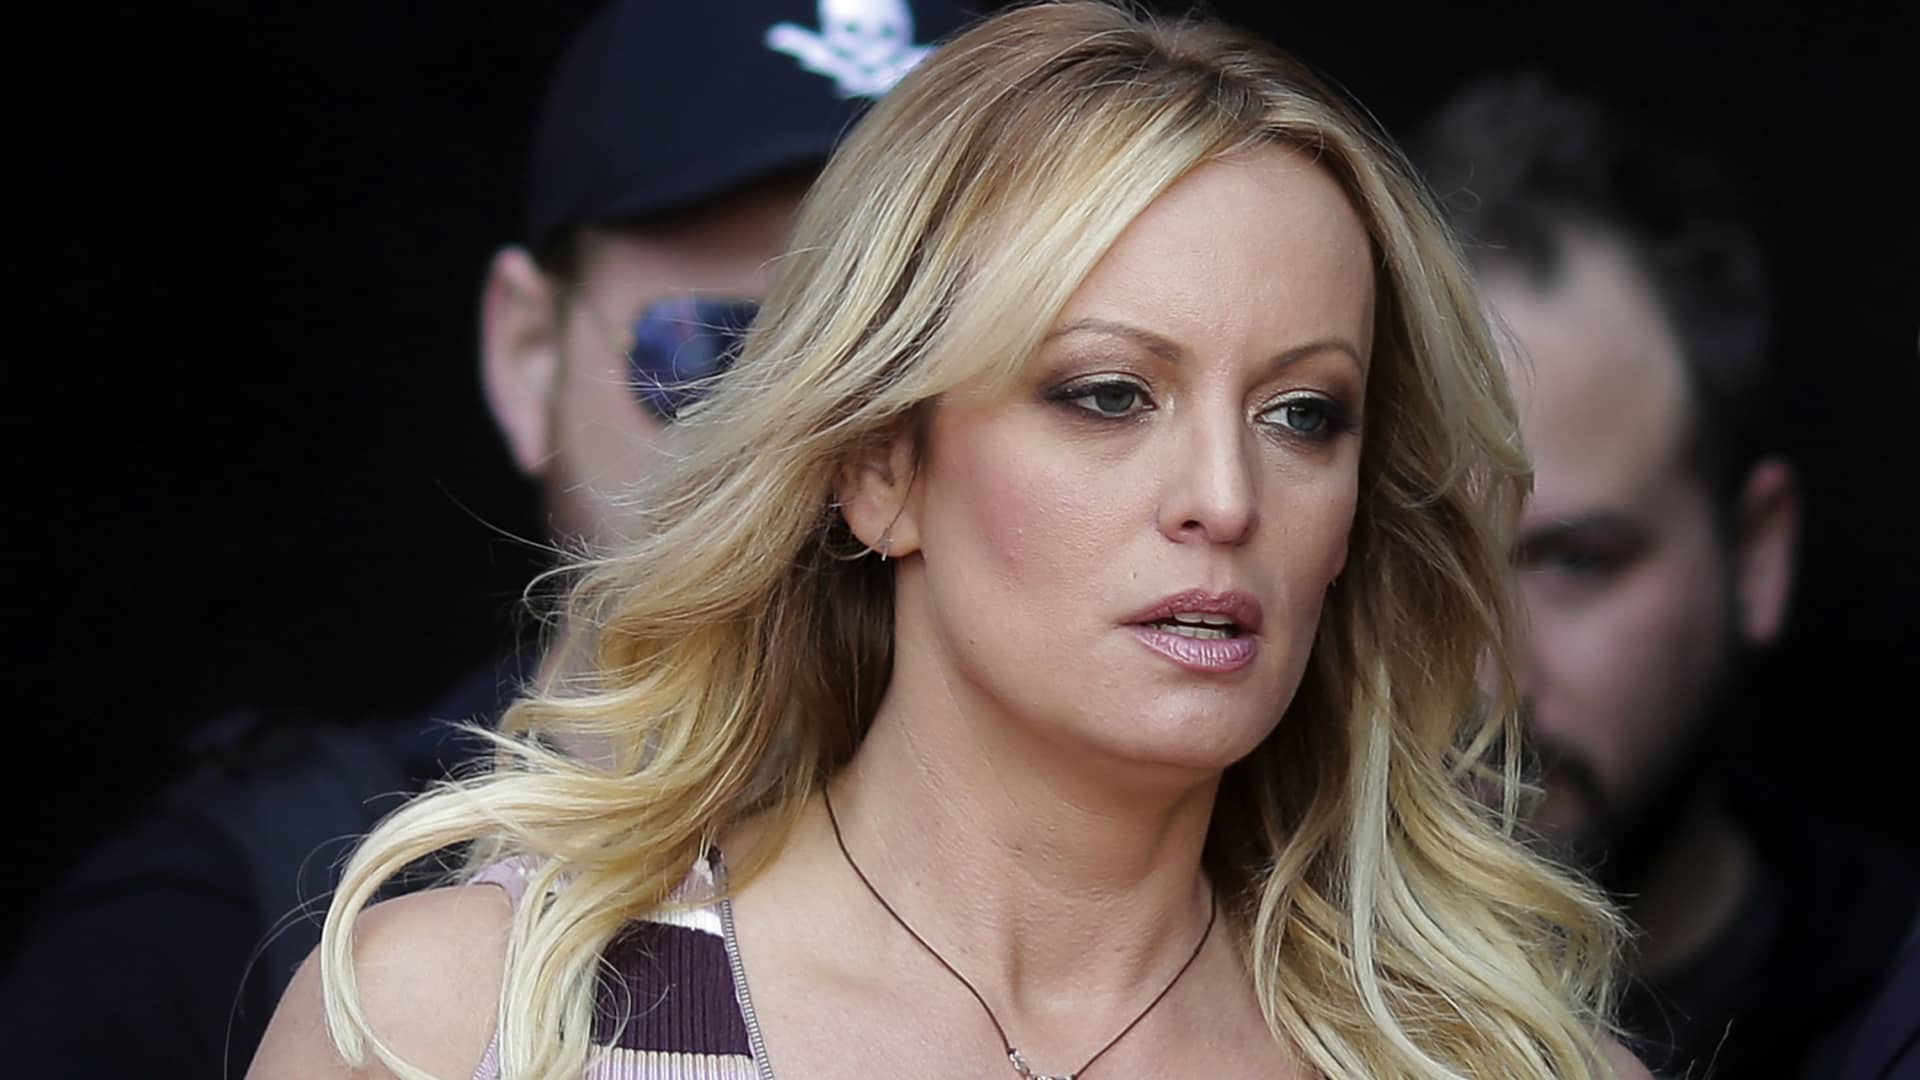 Adult film actress Stormy Daniels arrives for the opening of the adult entertainment fair Venus in Berlin, Oct. 11, 2018.